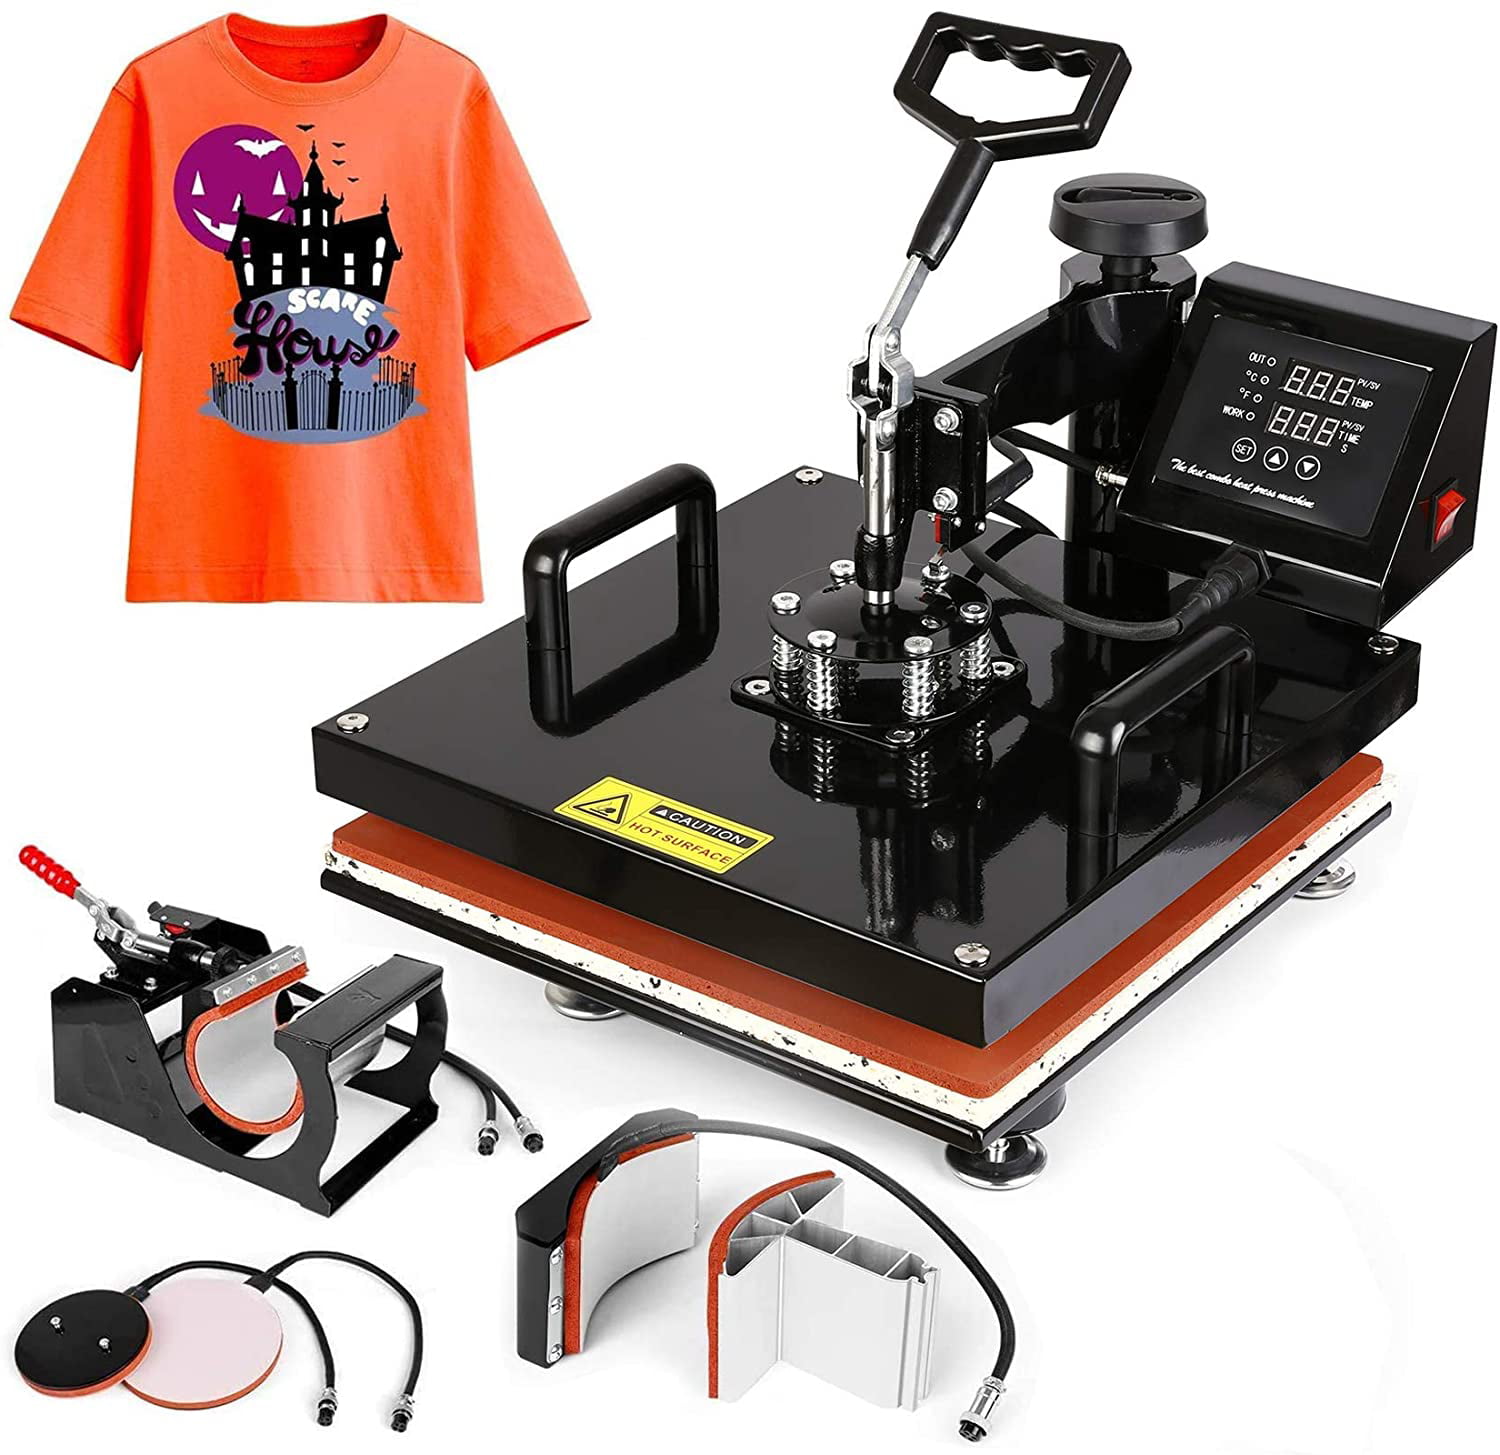 15"x15" 8 in 1 Heat Press Machine For T-Shirts Combo Kit Sublimation Swing away 